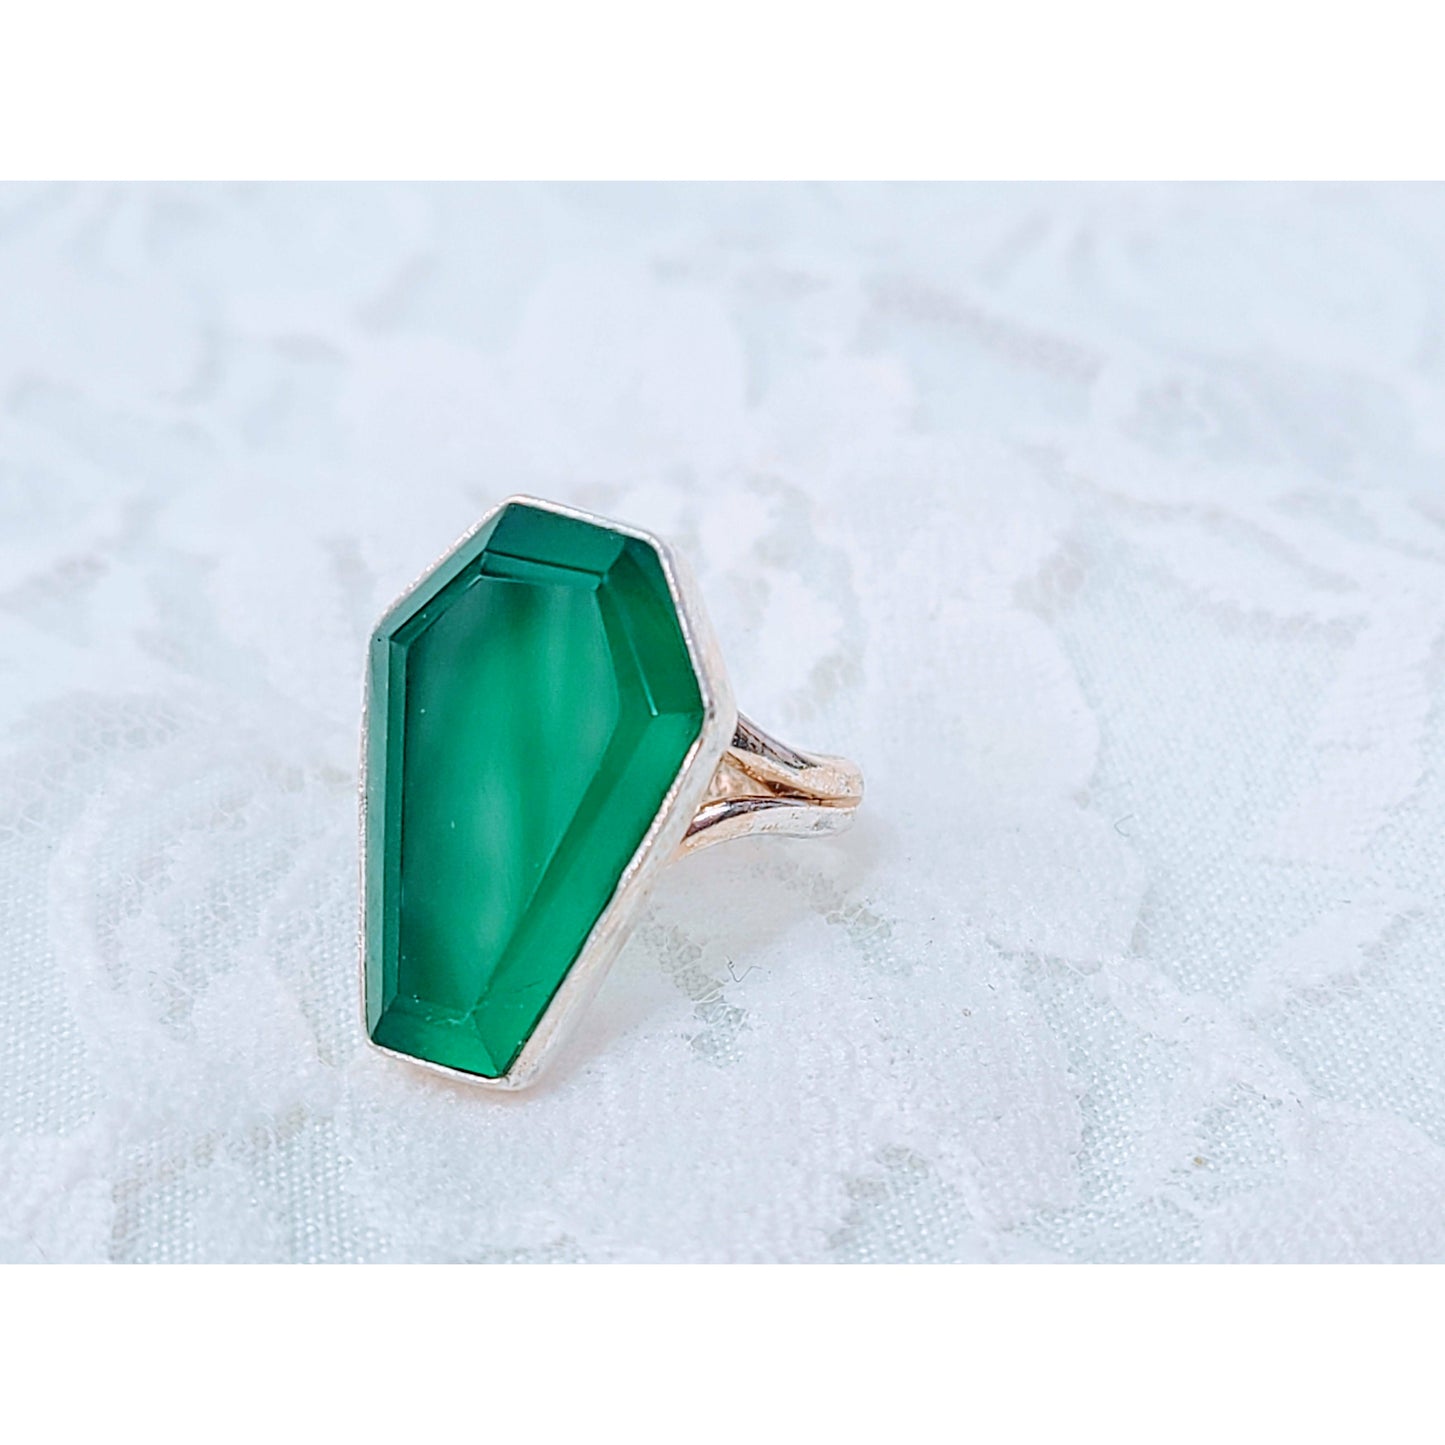 Green Onyx Coffin Ring 925 Size 7 Solid Sterling Silver Spooky Gothic Style Ring Crystal Healing Energy